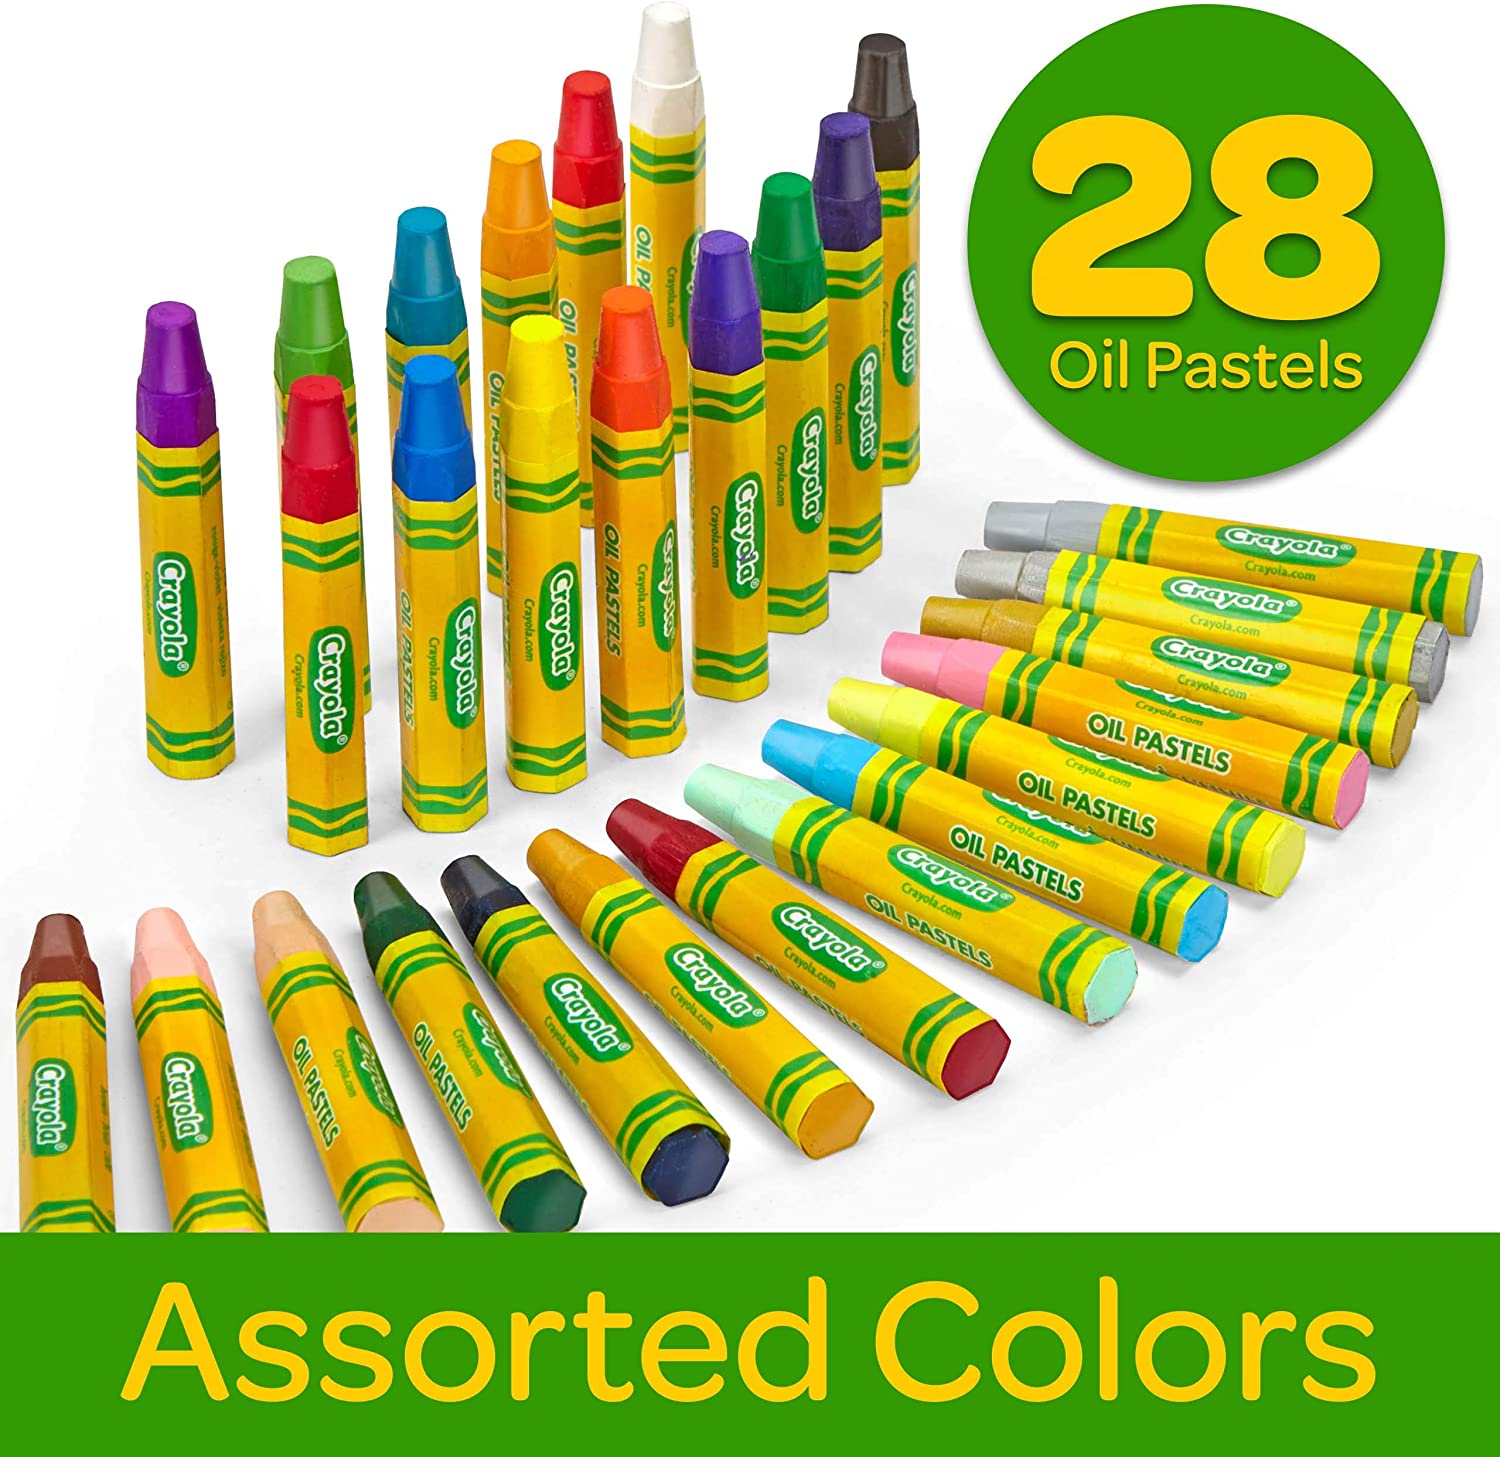 LeobooseLovely Non-Toxic Children Kids Crayon Oil Pastel Drawing Set School Office Safe Wax Crayon Pen Stationery Student Gift 